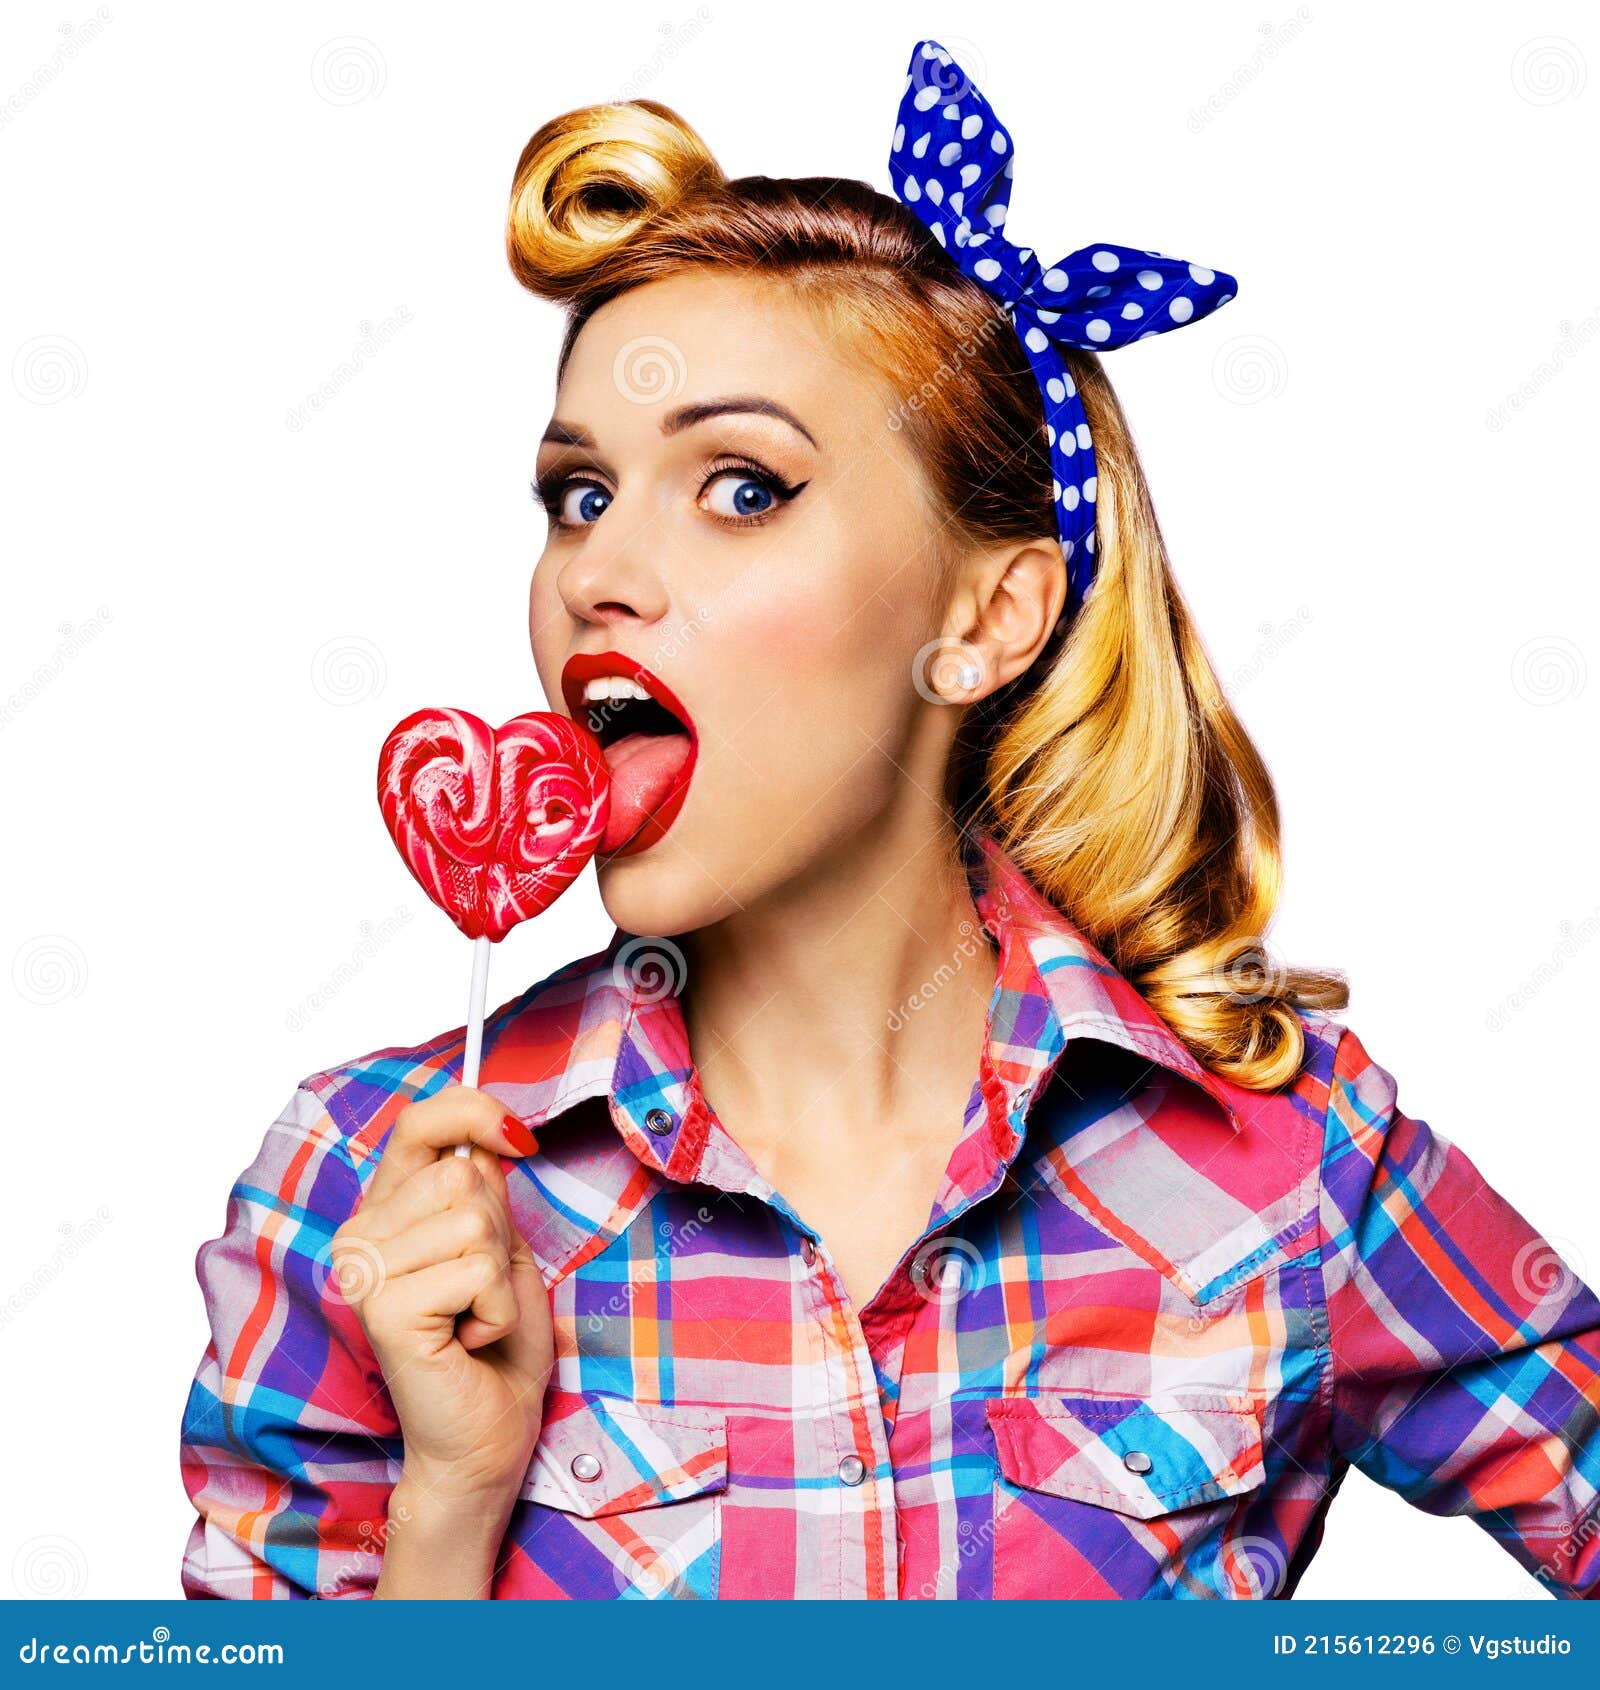 Woman Licking Heart Shape Lollipop Dressed In Pinup Style Plaid Shirt 